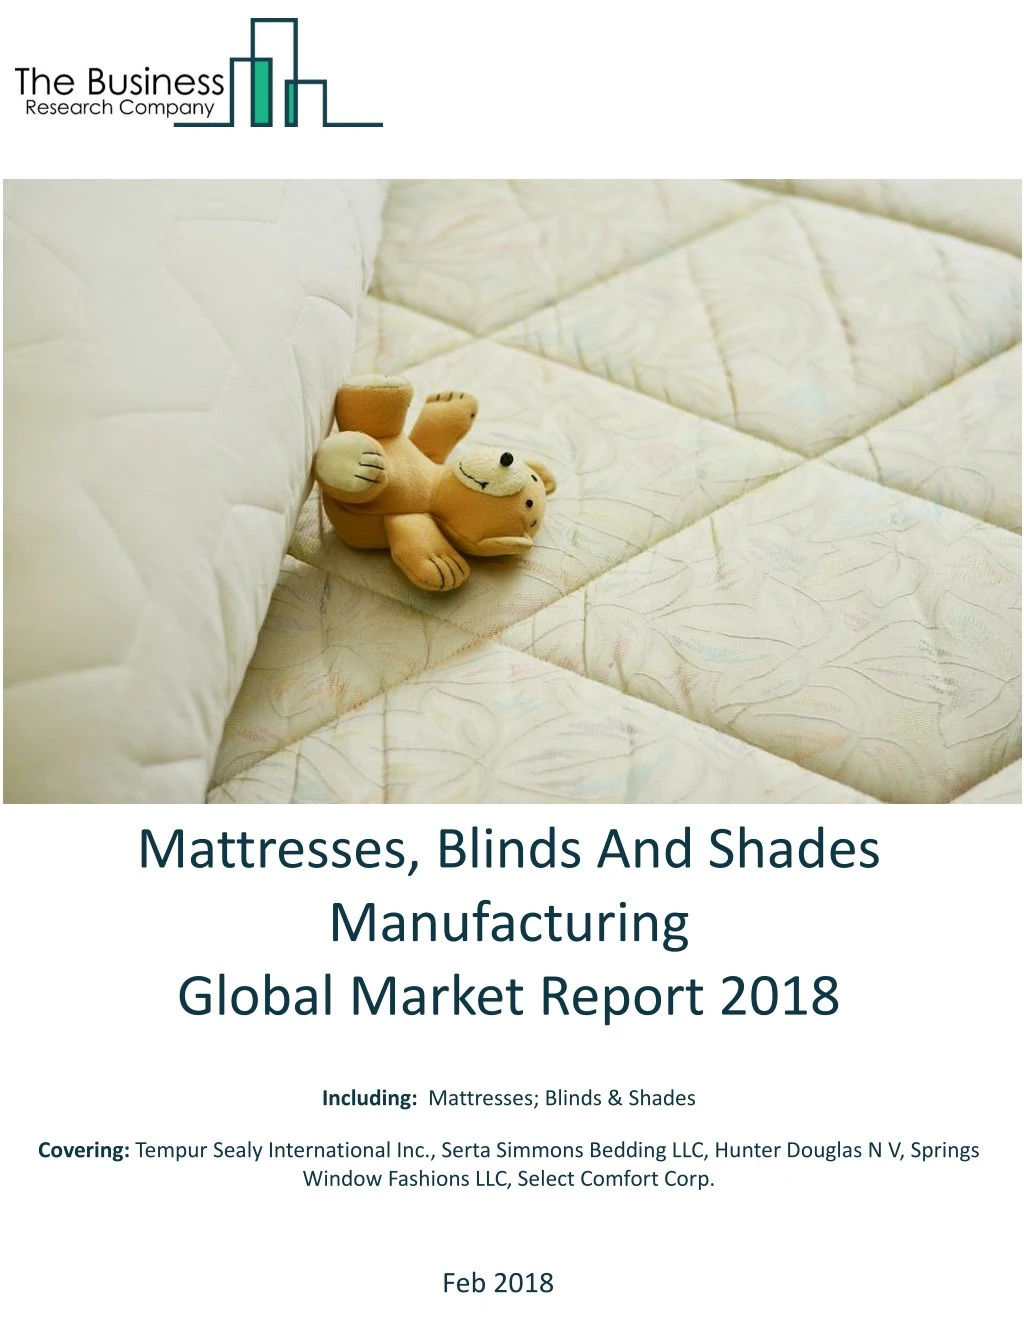 mattresses blinds and shades manufacturing global